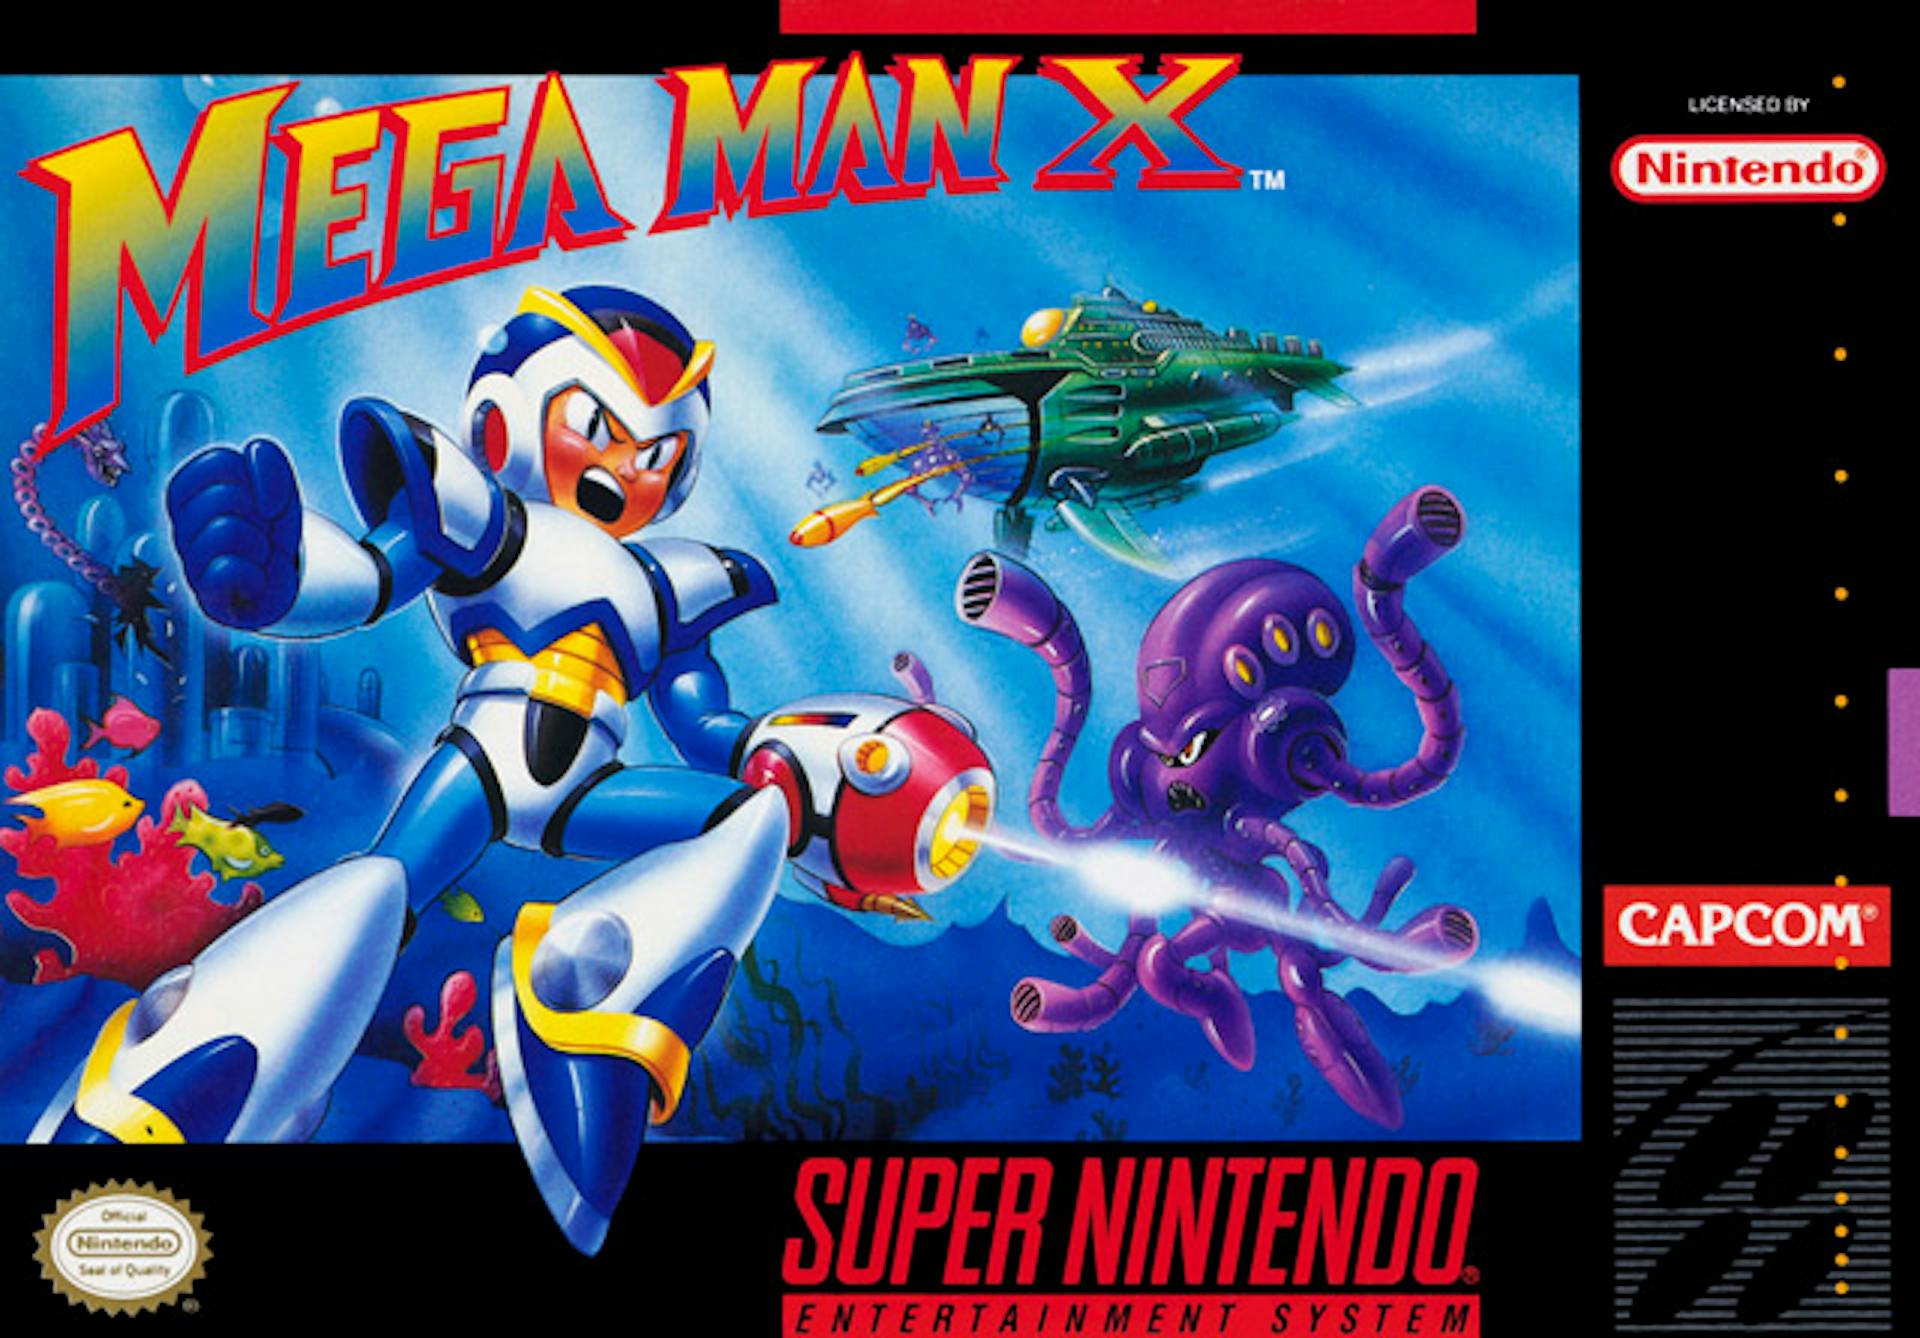 Box art for Mega Man X, my favorite game of all time and my gaming muse.